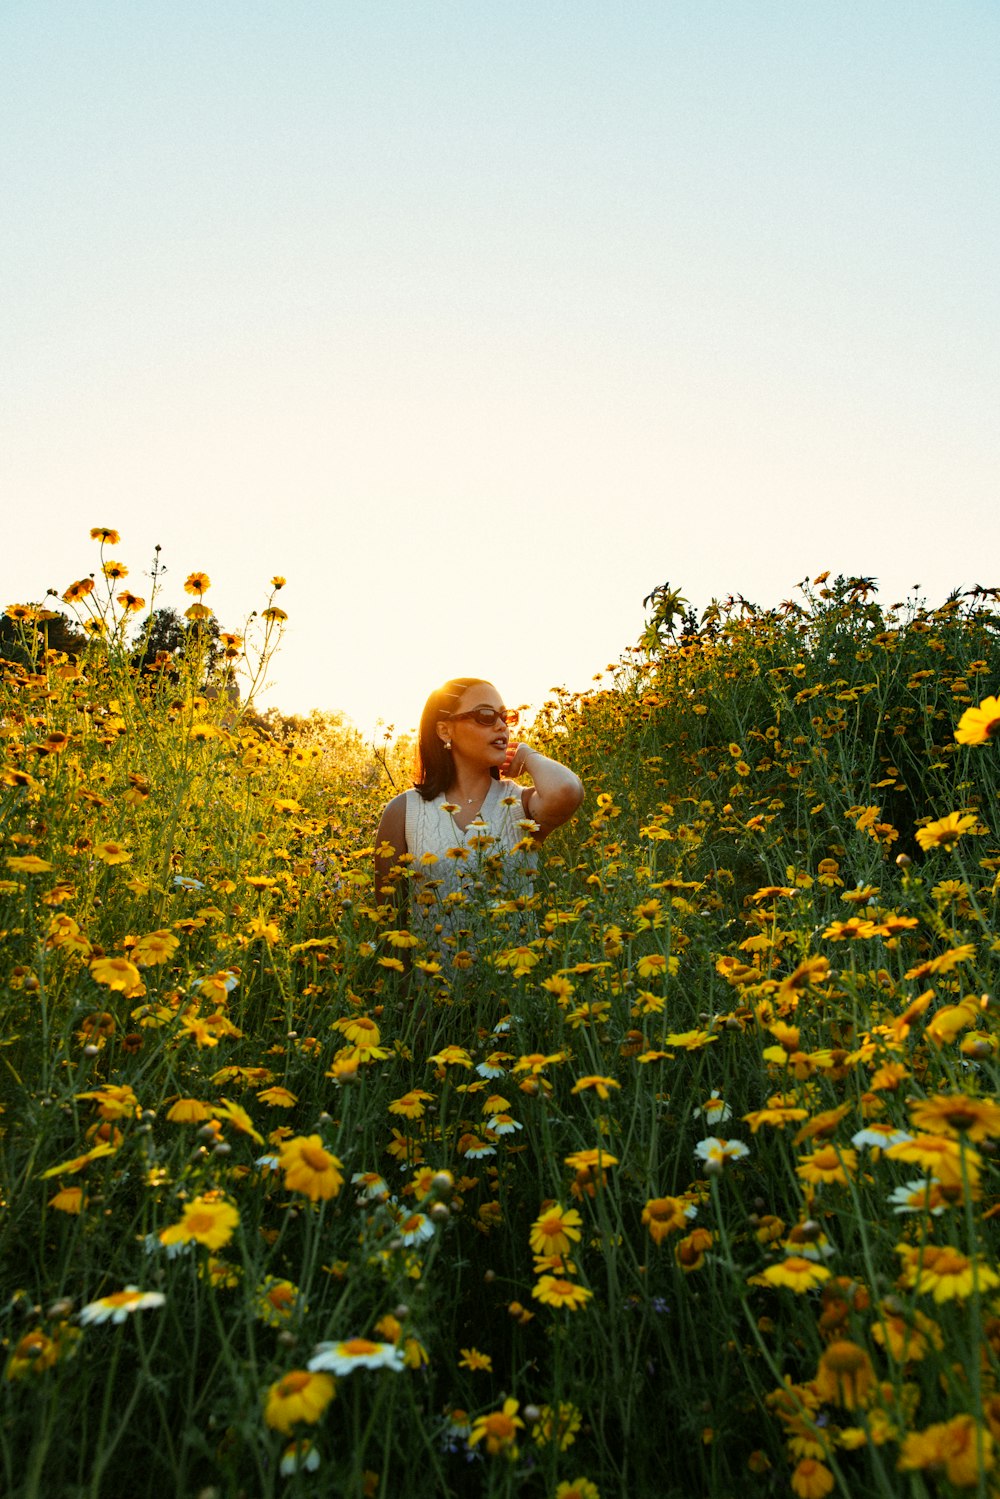 a woman sitting in a field of yellow flowers